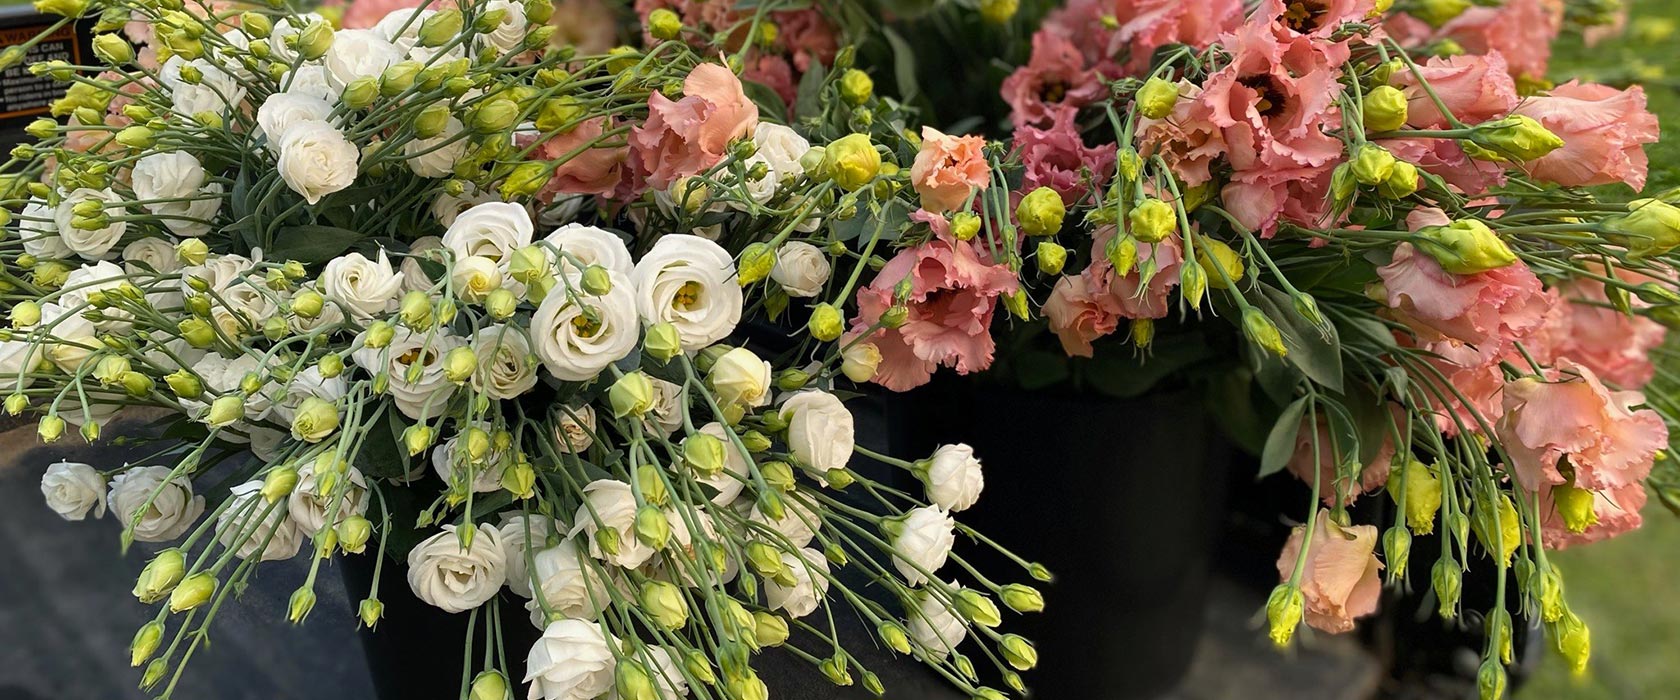 Spray of two buckets of freshly cut flowers in white and muted pink